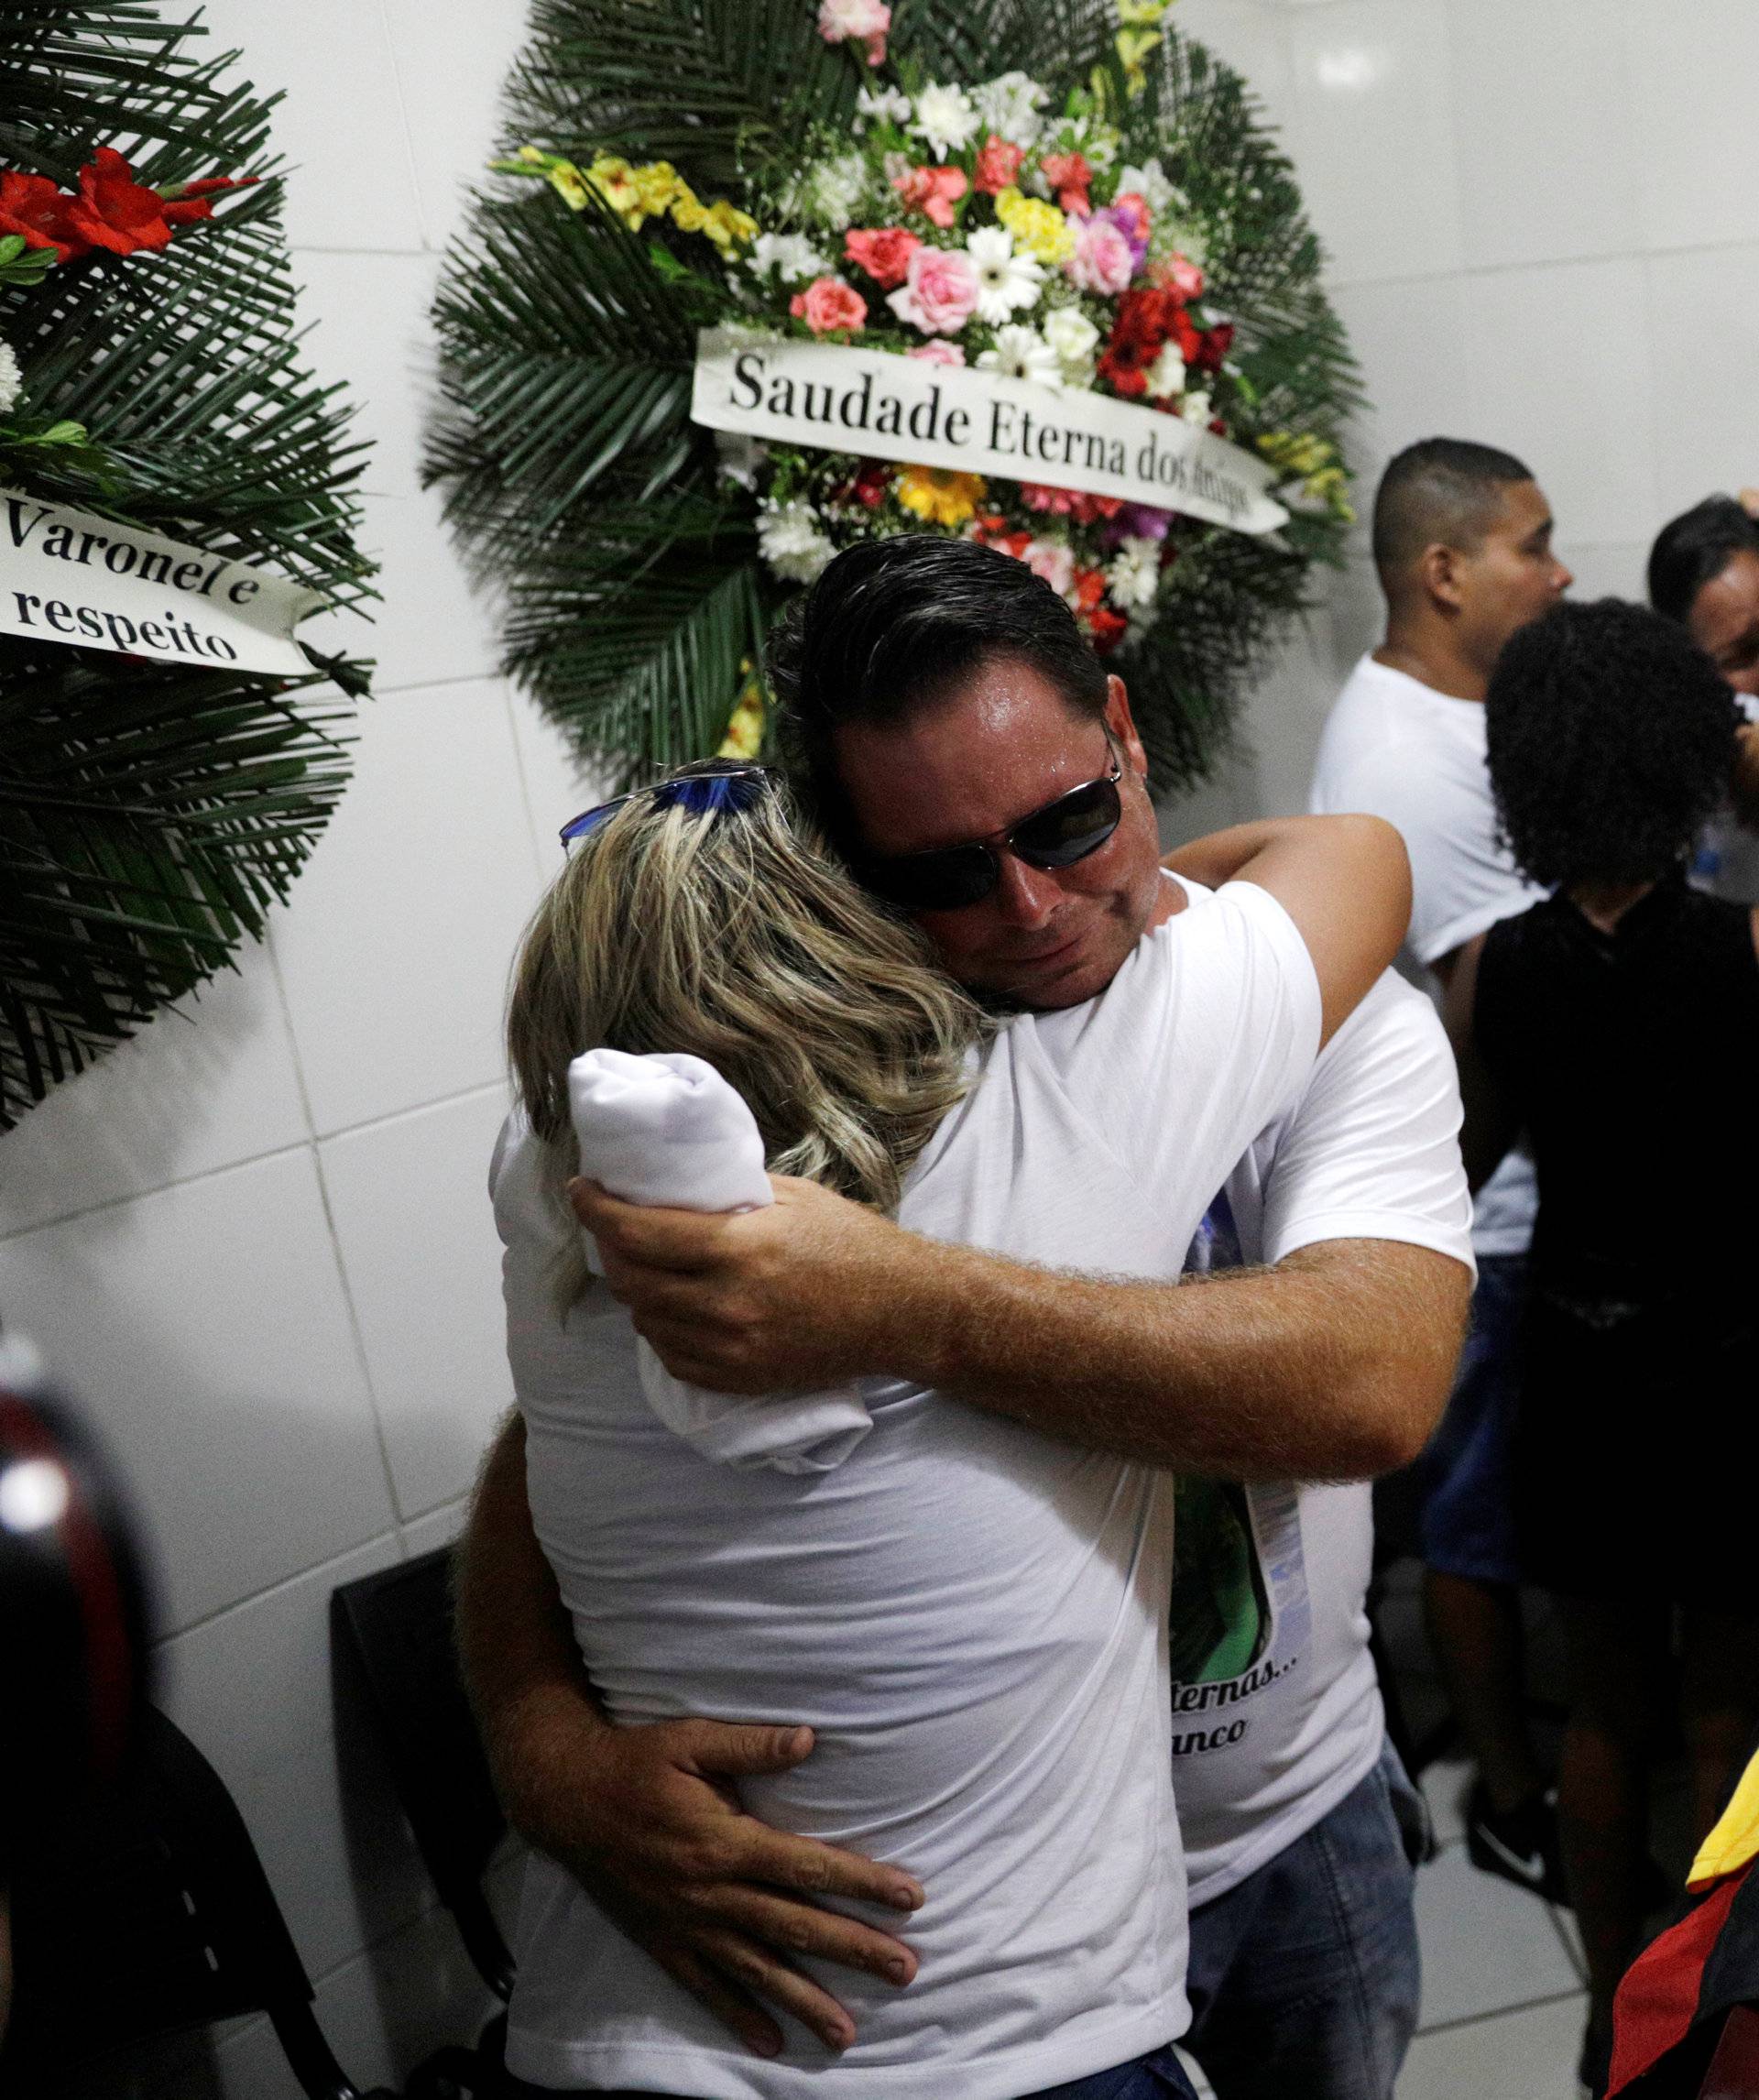 Relatives and friends of goalkeeper Christian Esmerio, 15, react during his funeral after a deadly fire at Flamengo soccer club's training center, in Rio de Janeiro